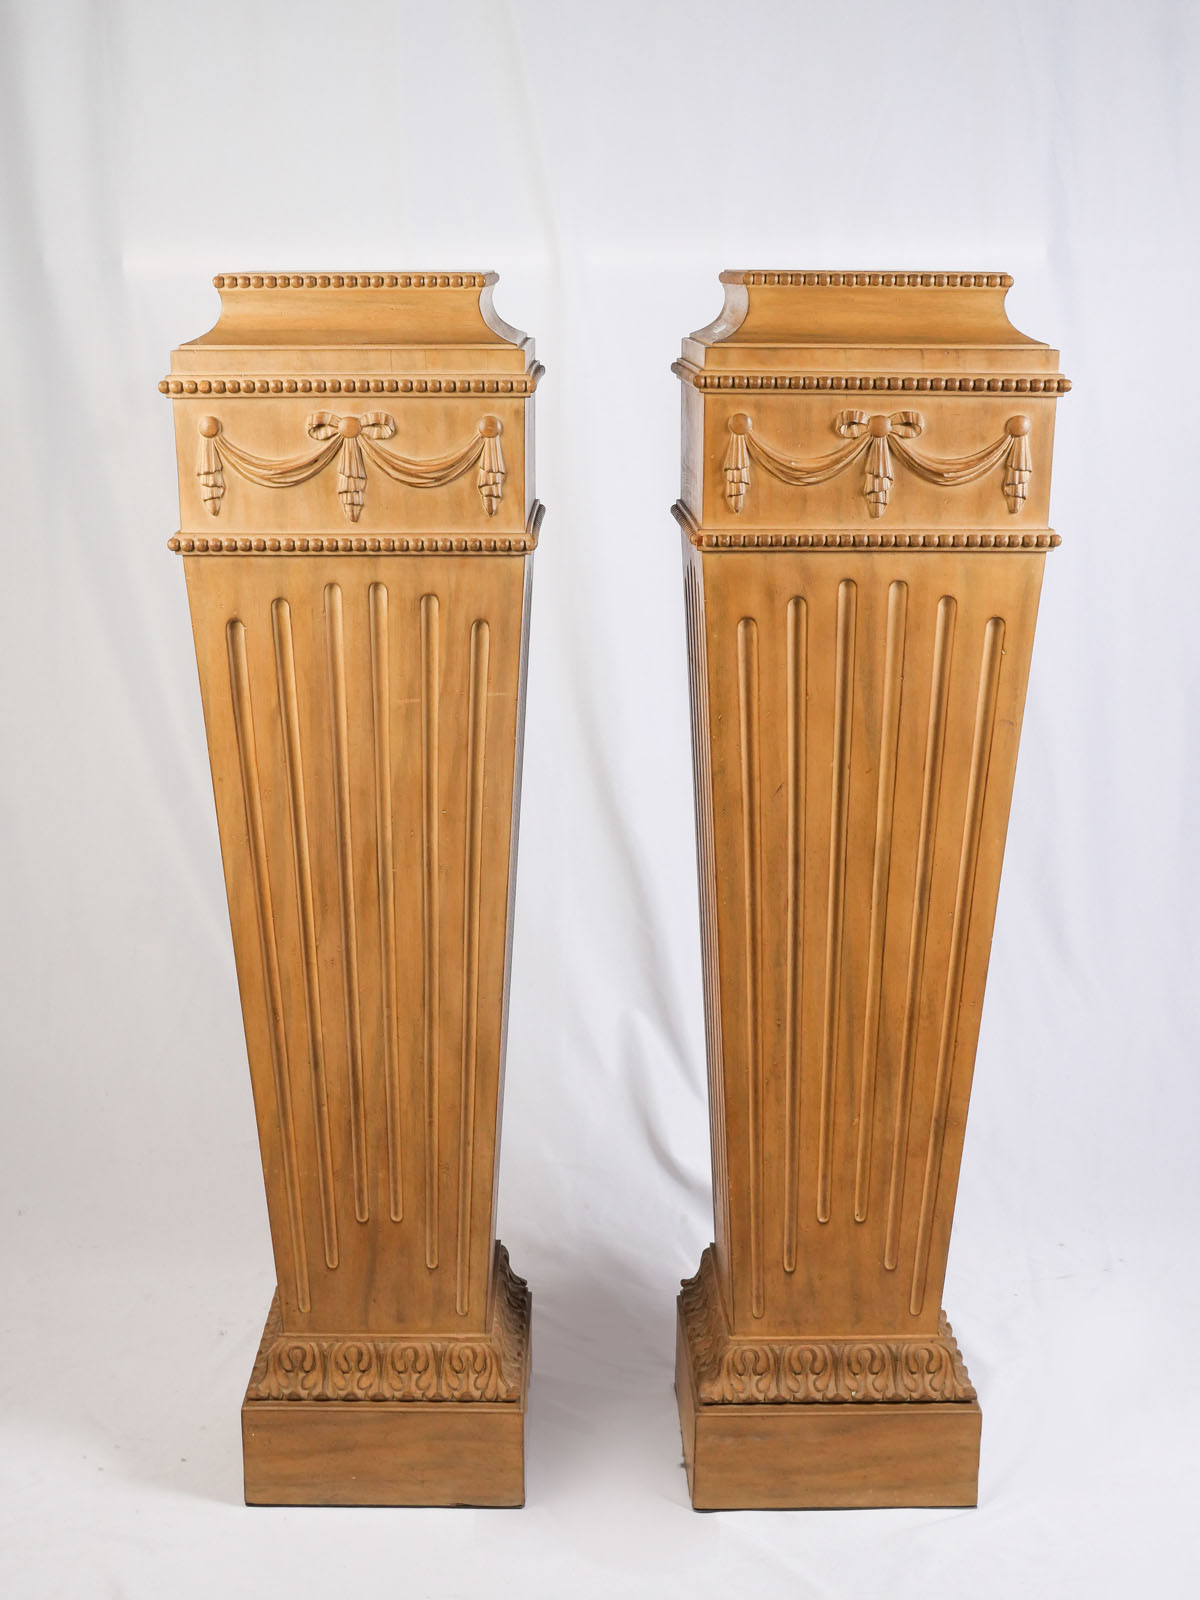 PAIR OF CARVED WOODEN PEDESTALS: